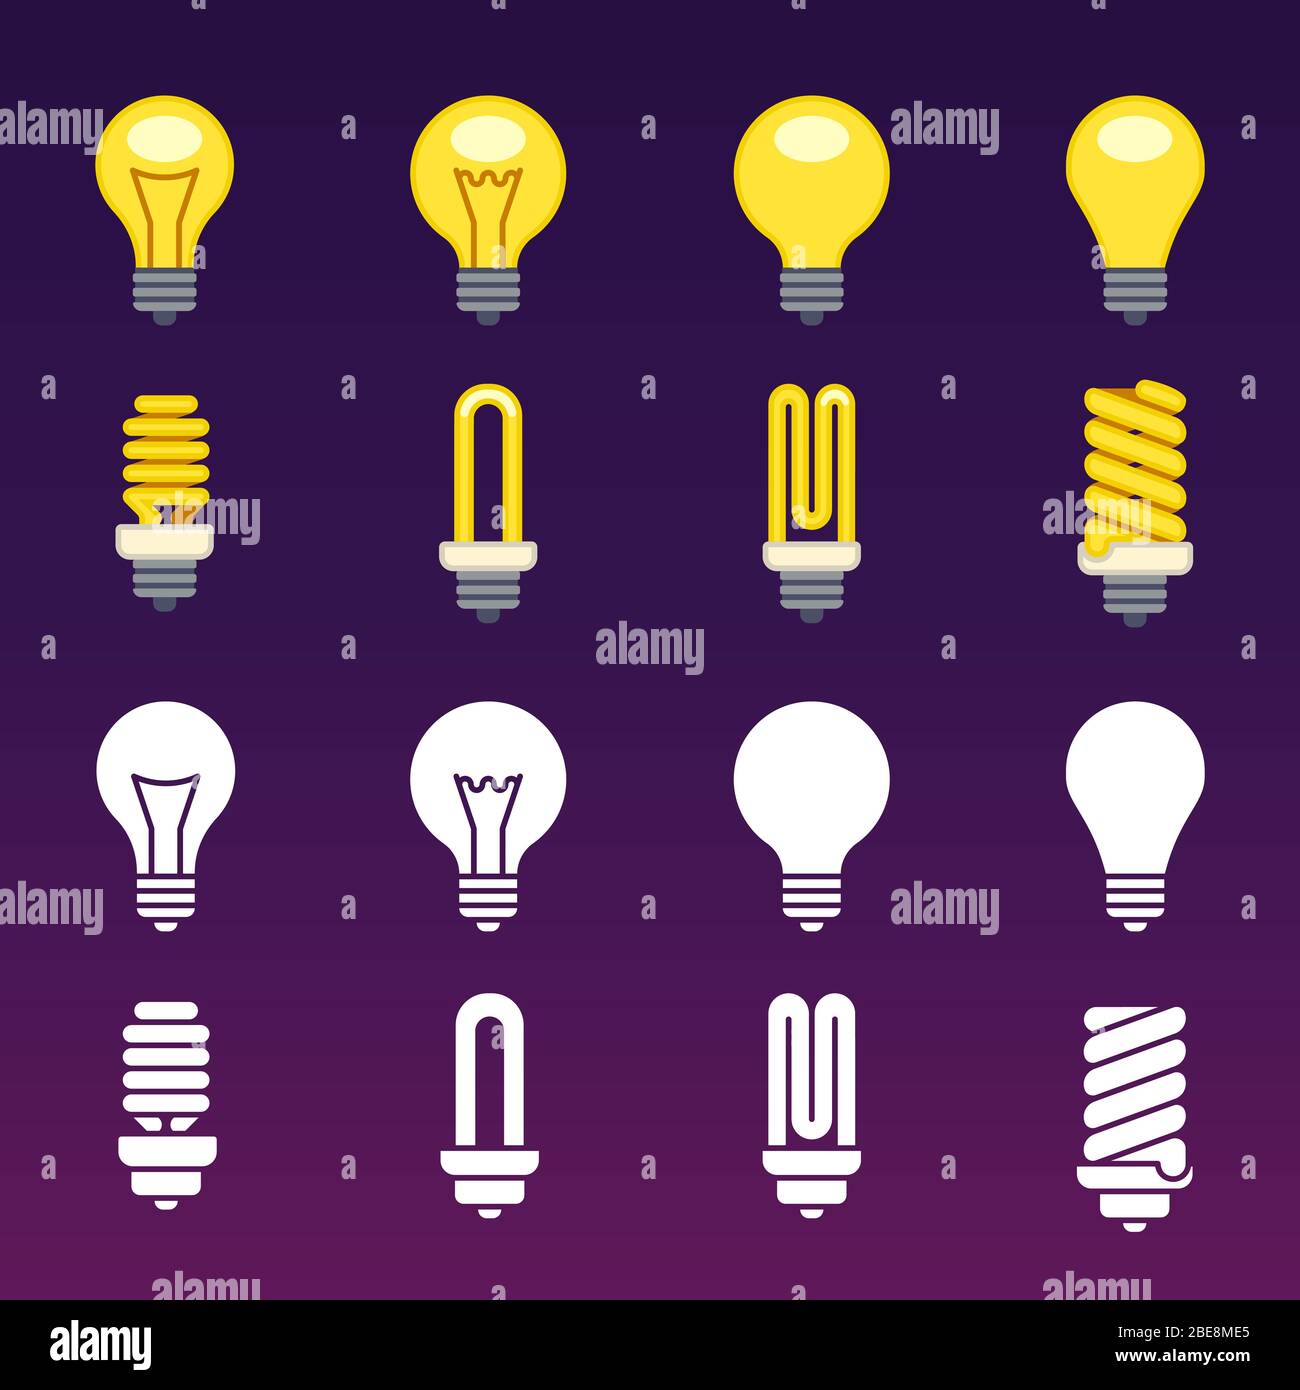 White silhouettes and colorful light bulbs icons. Idea lamp symbol illustration Stock Vector